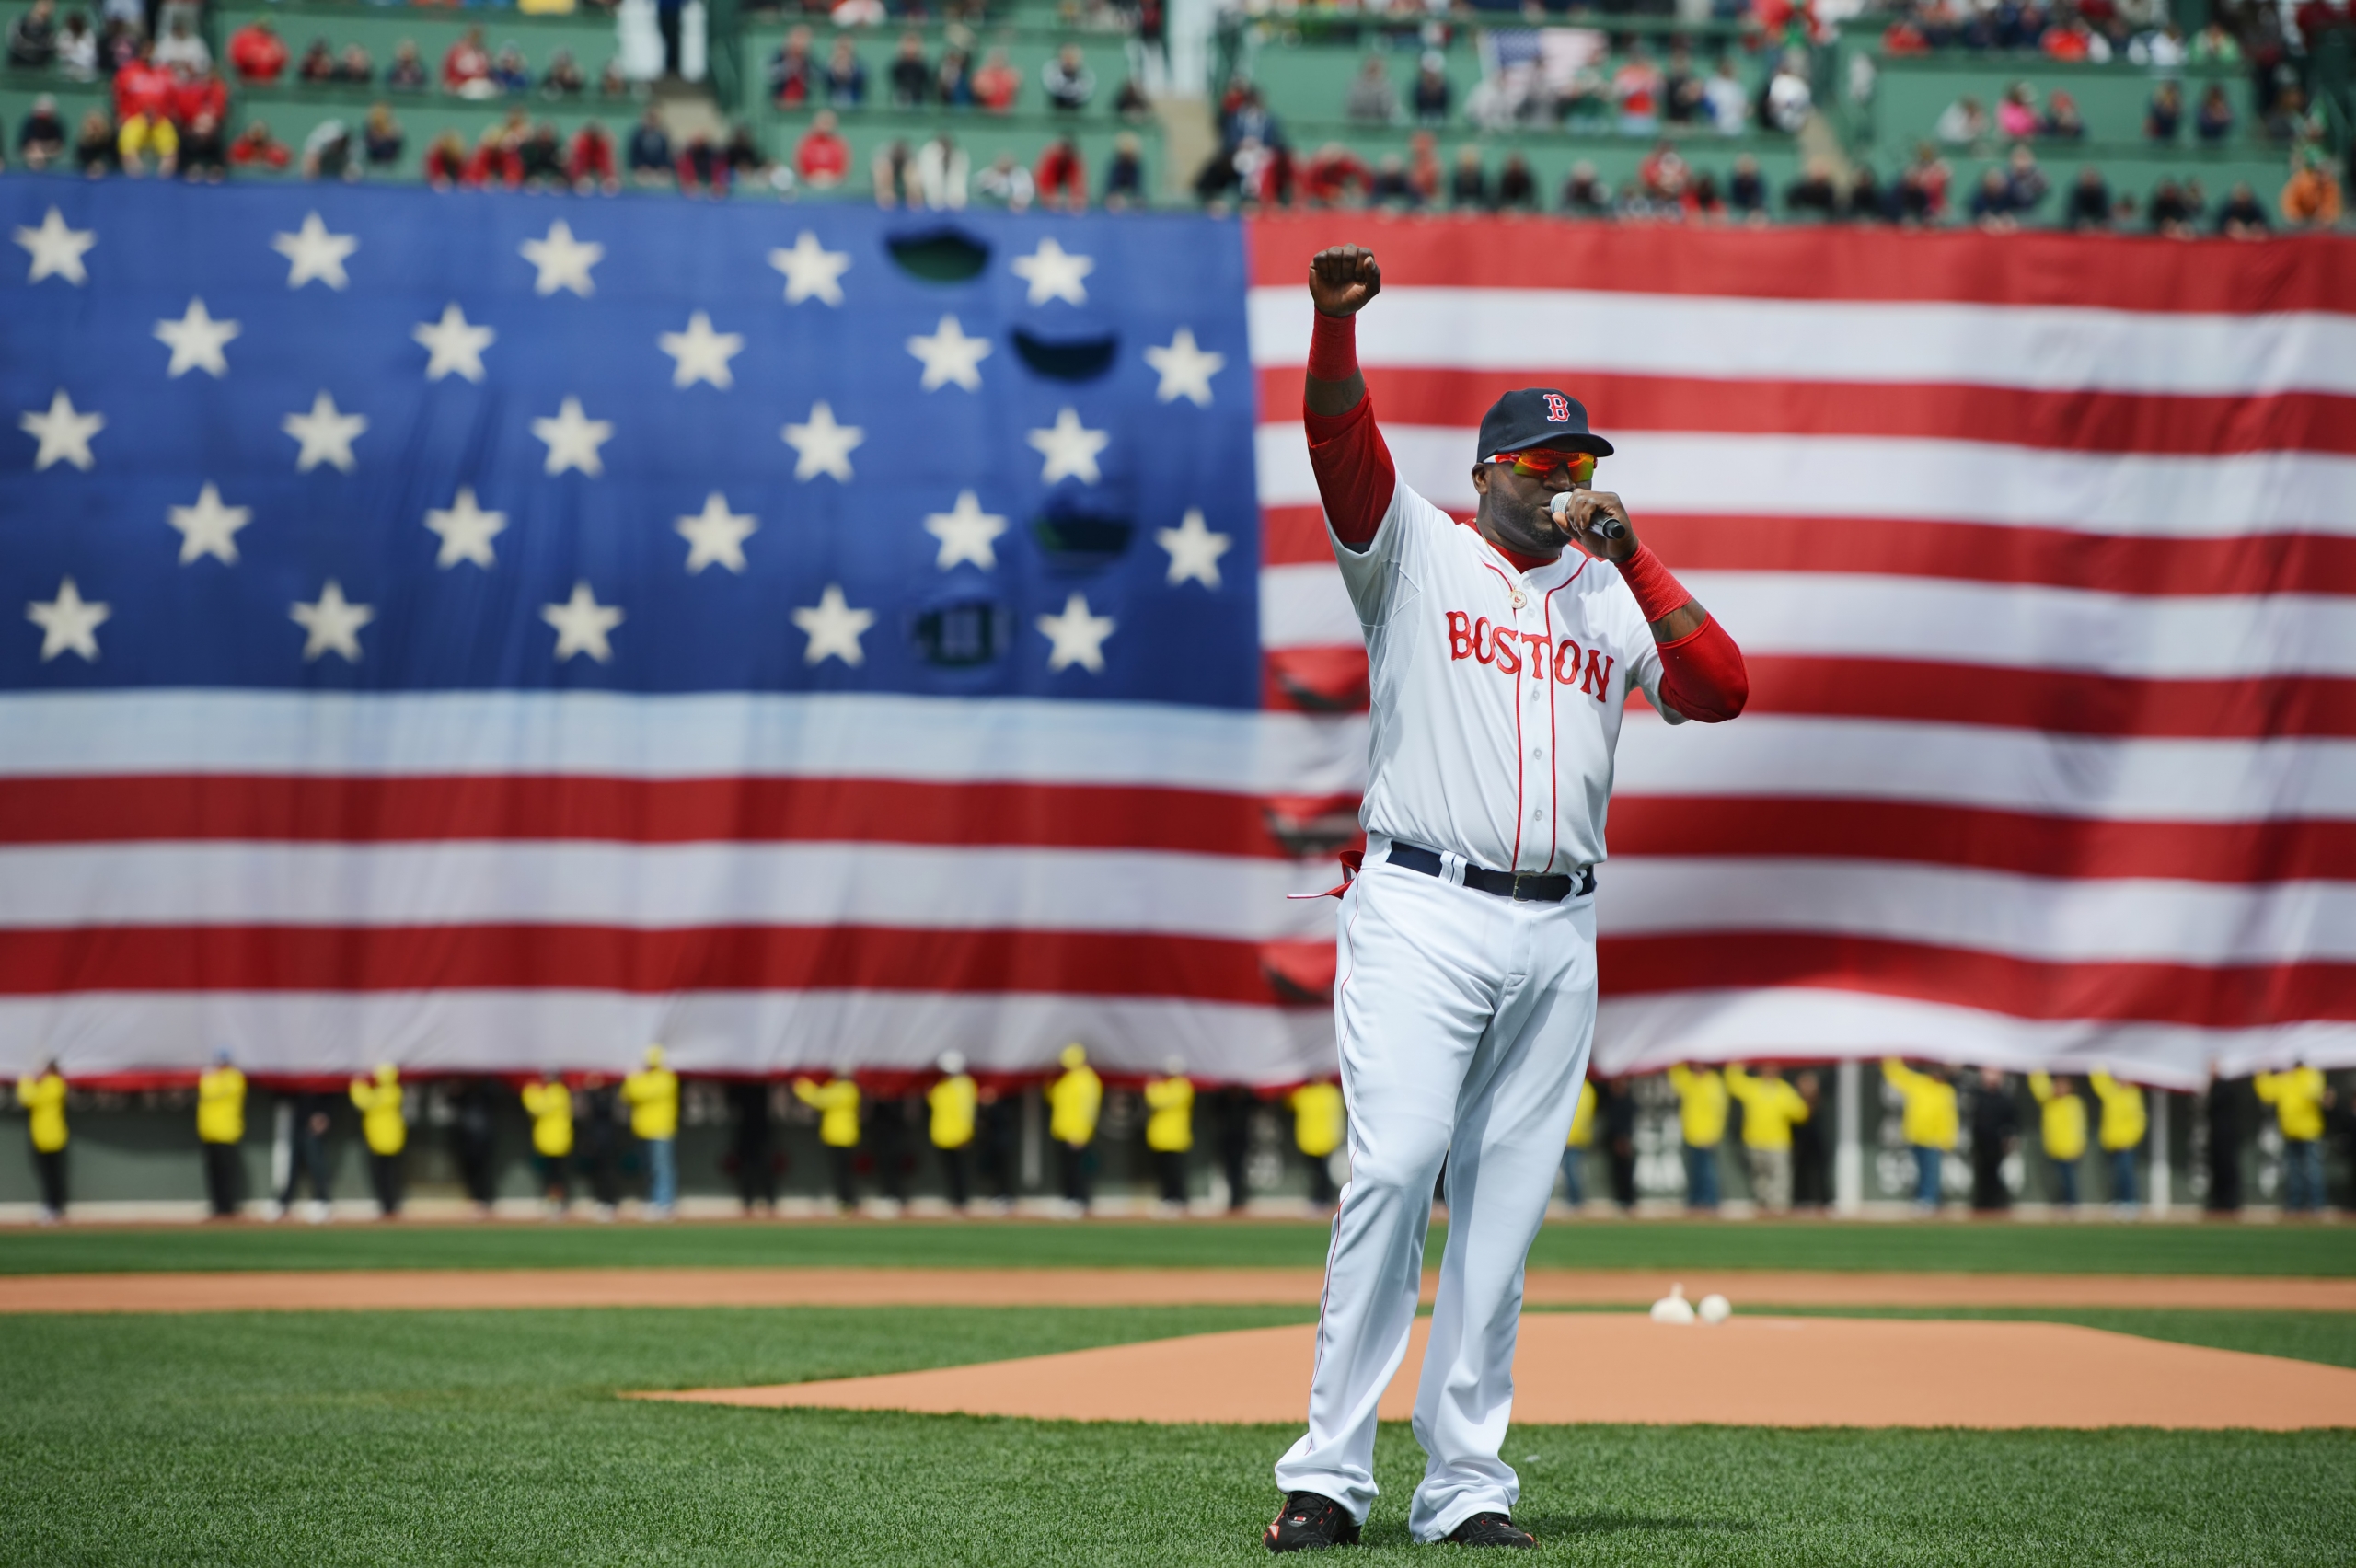 Boston Marathon-Themed Red Sox Uniforms? Yes Please. – The Harrier